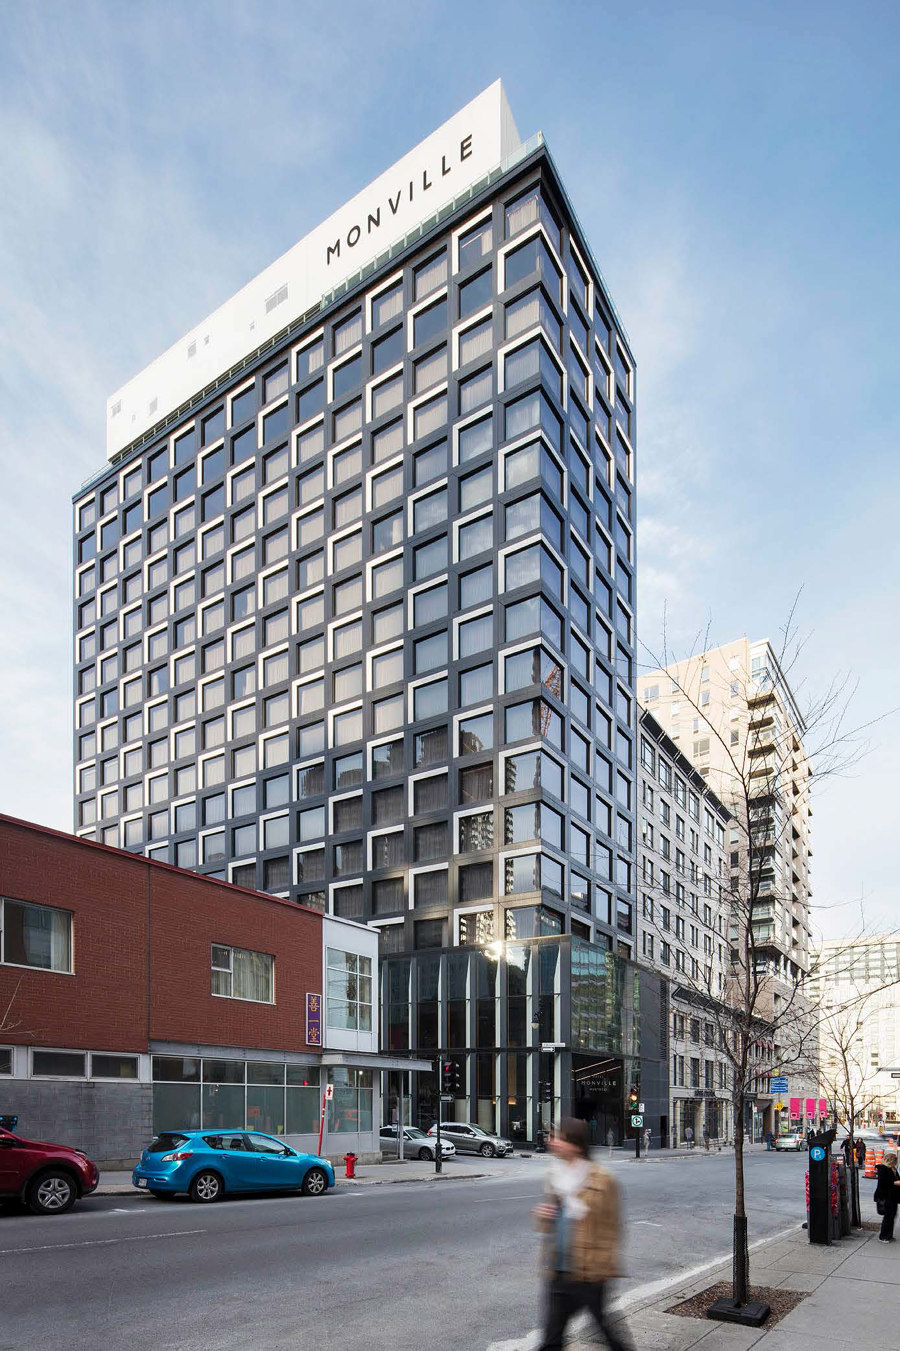 Hotel Monville | Hotels | ACDF Architecture